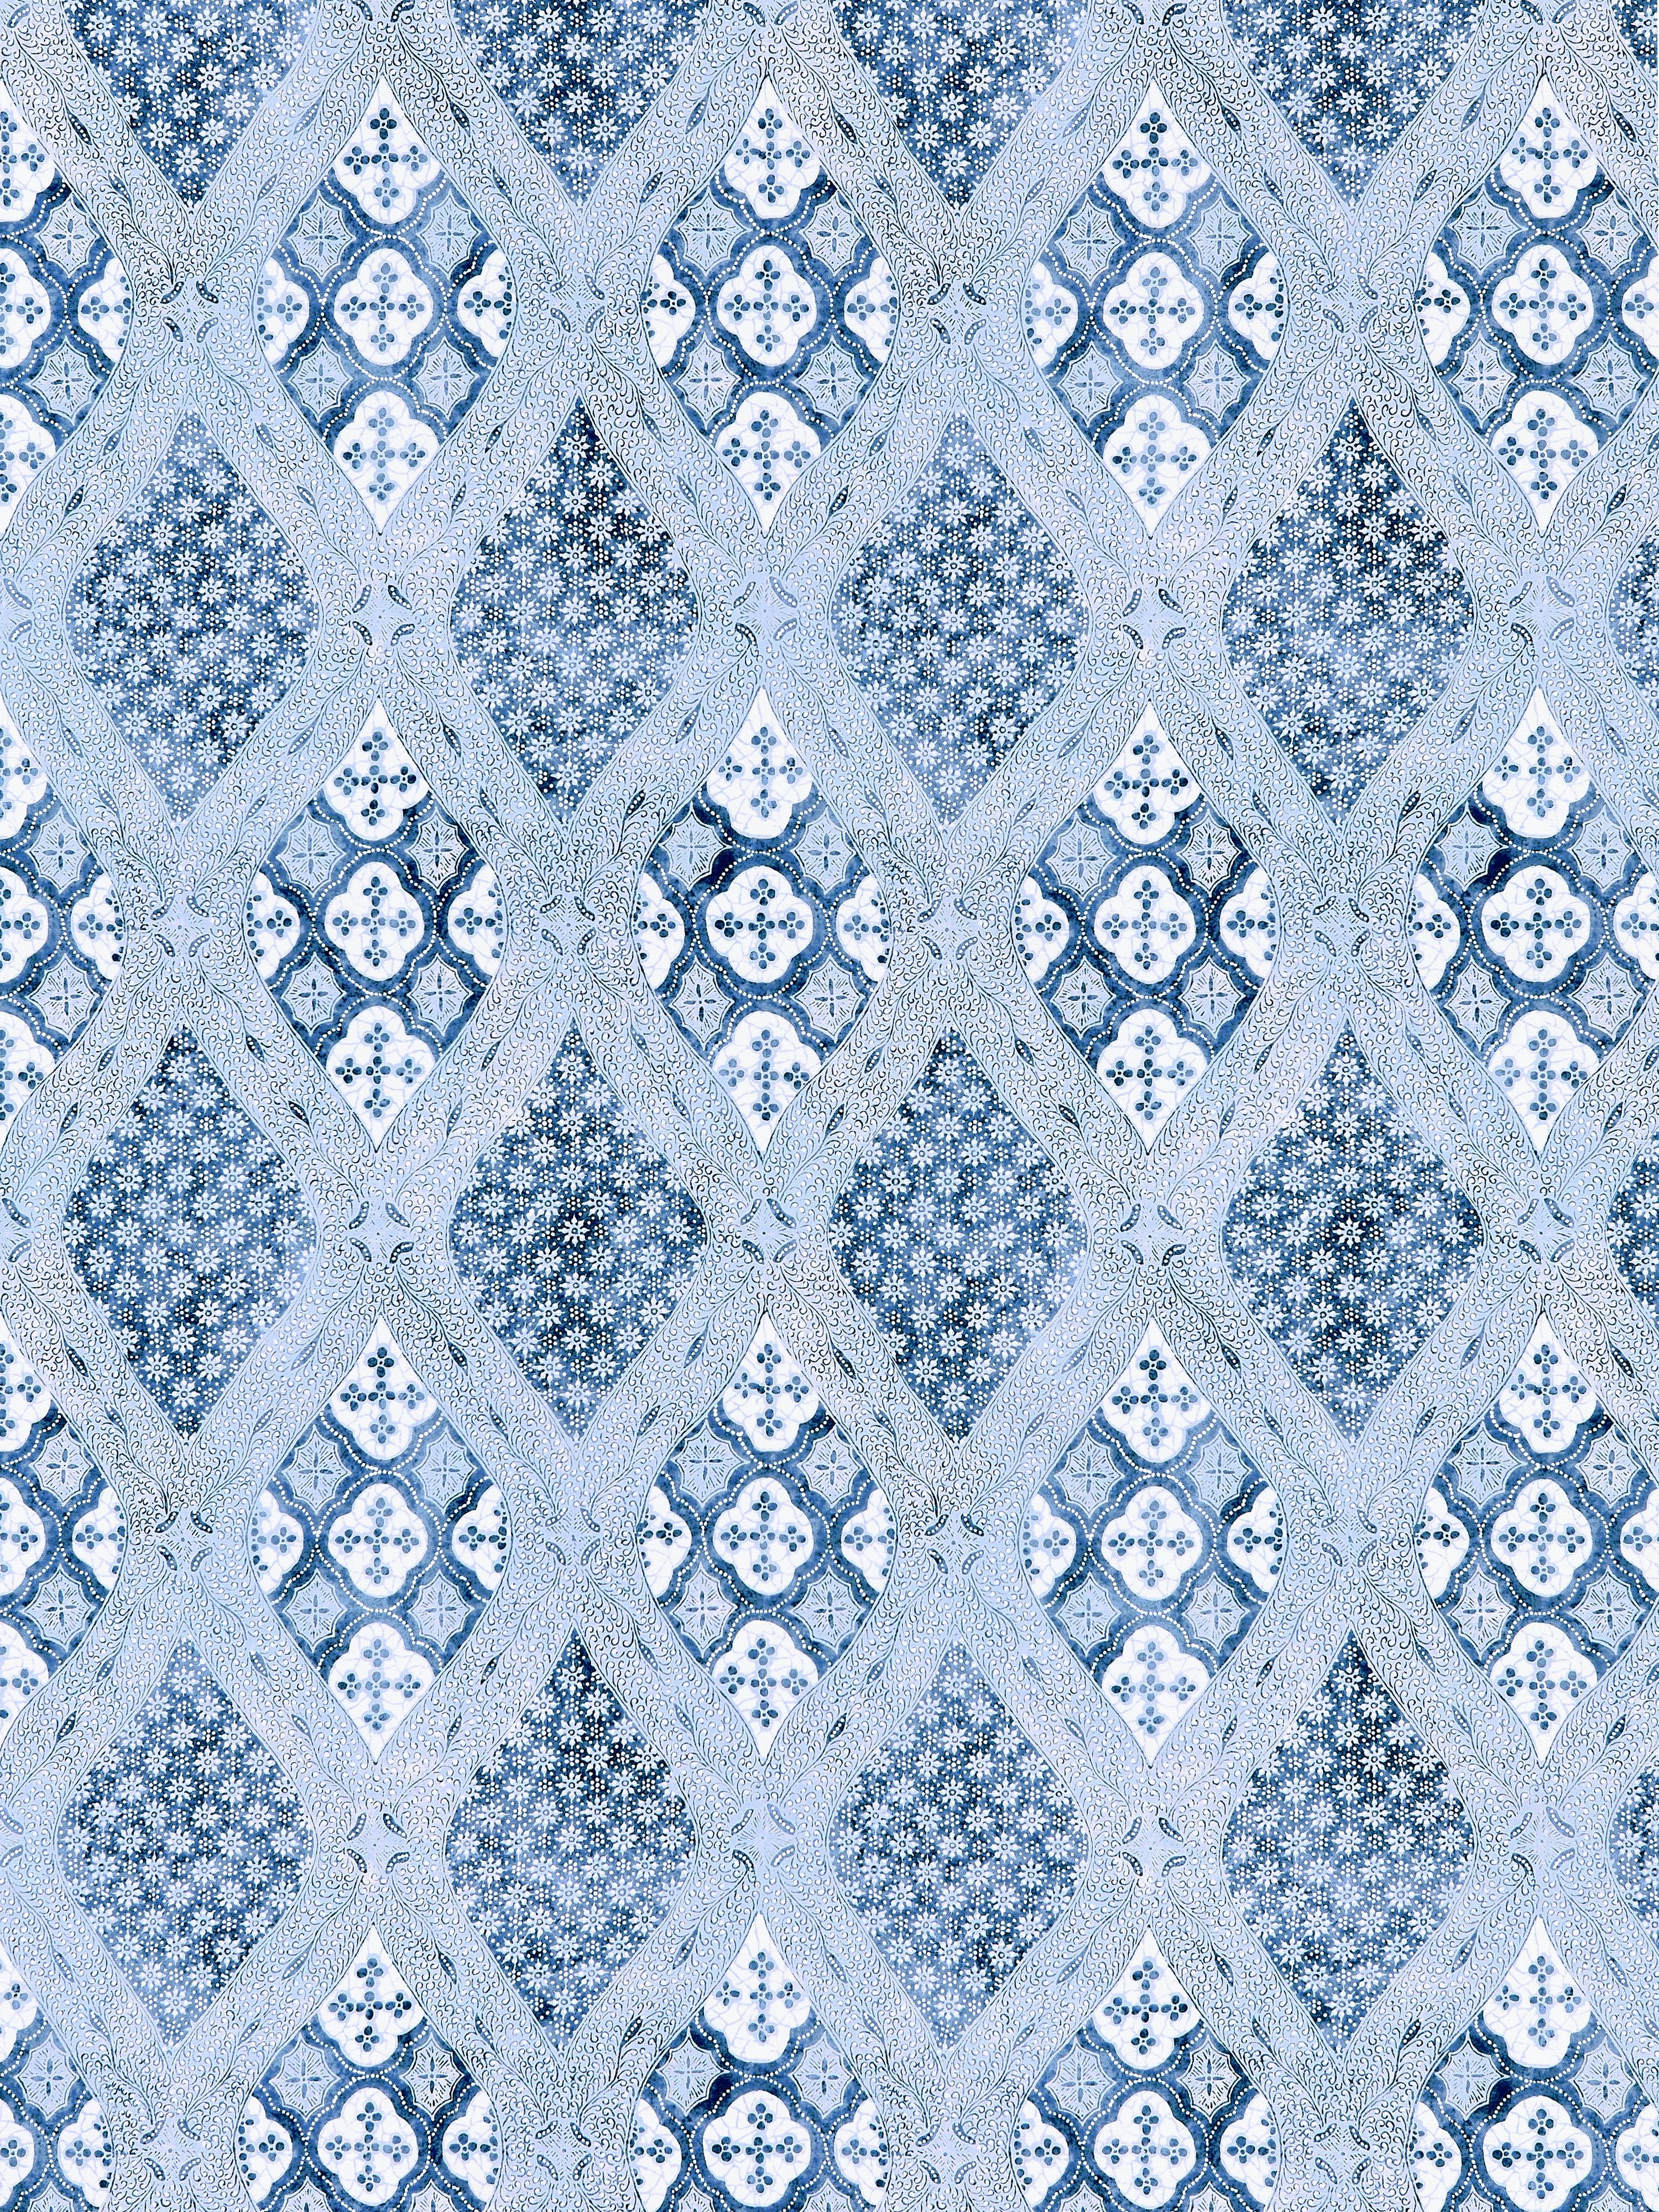 Farrah Print fabric in lakeside color - pattern number SC 000316626 - by Scalamandre in the Scalamandre Fabrics Book 1 collection